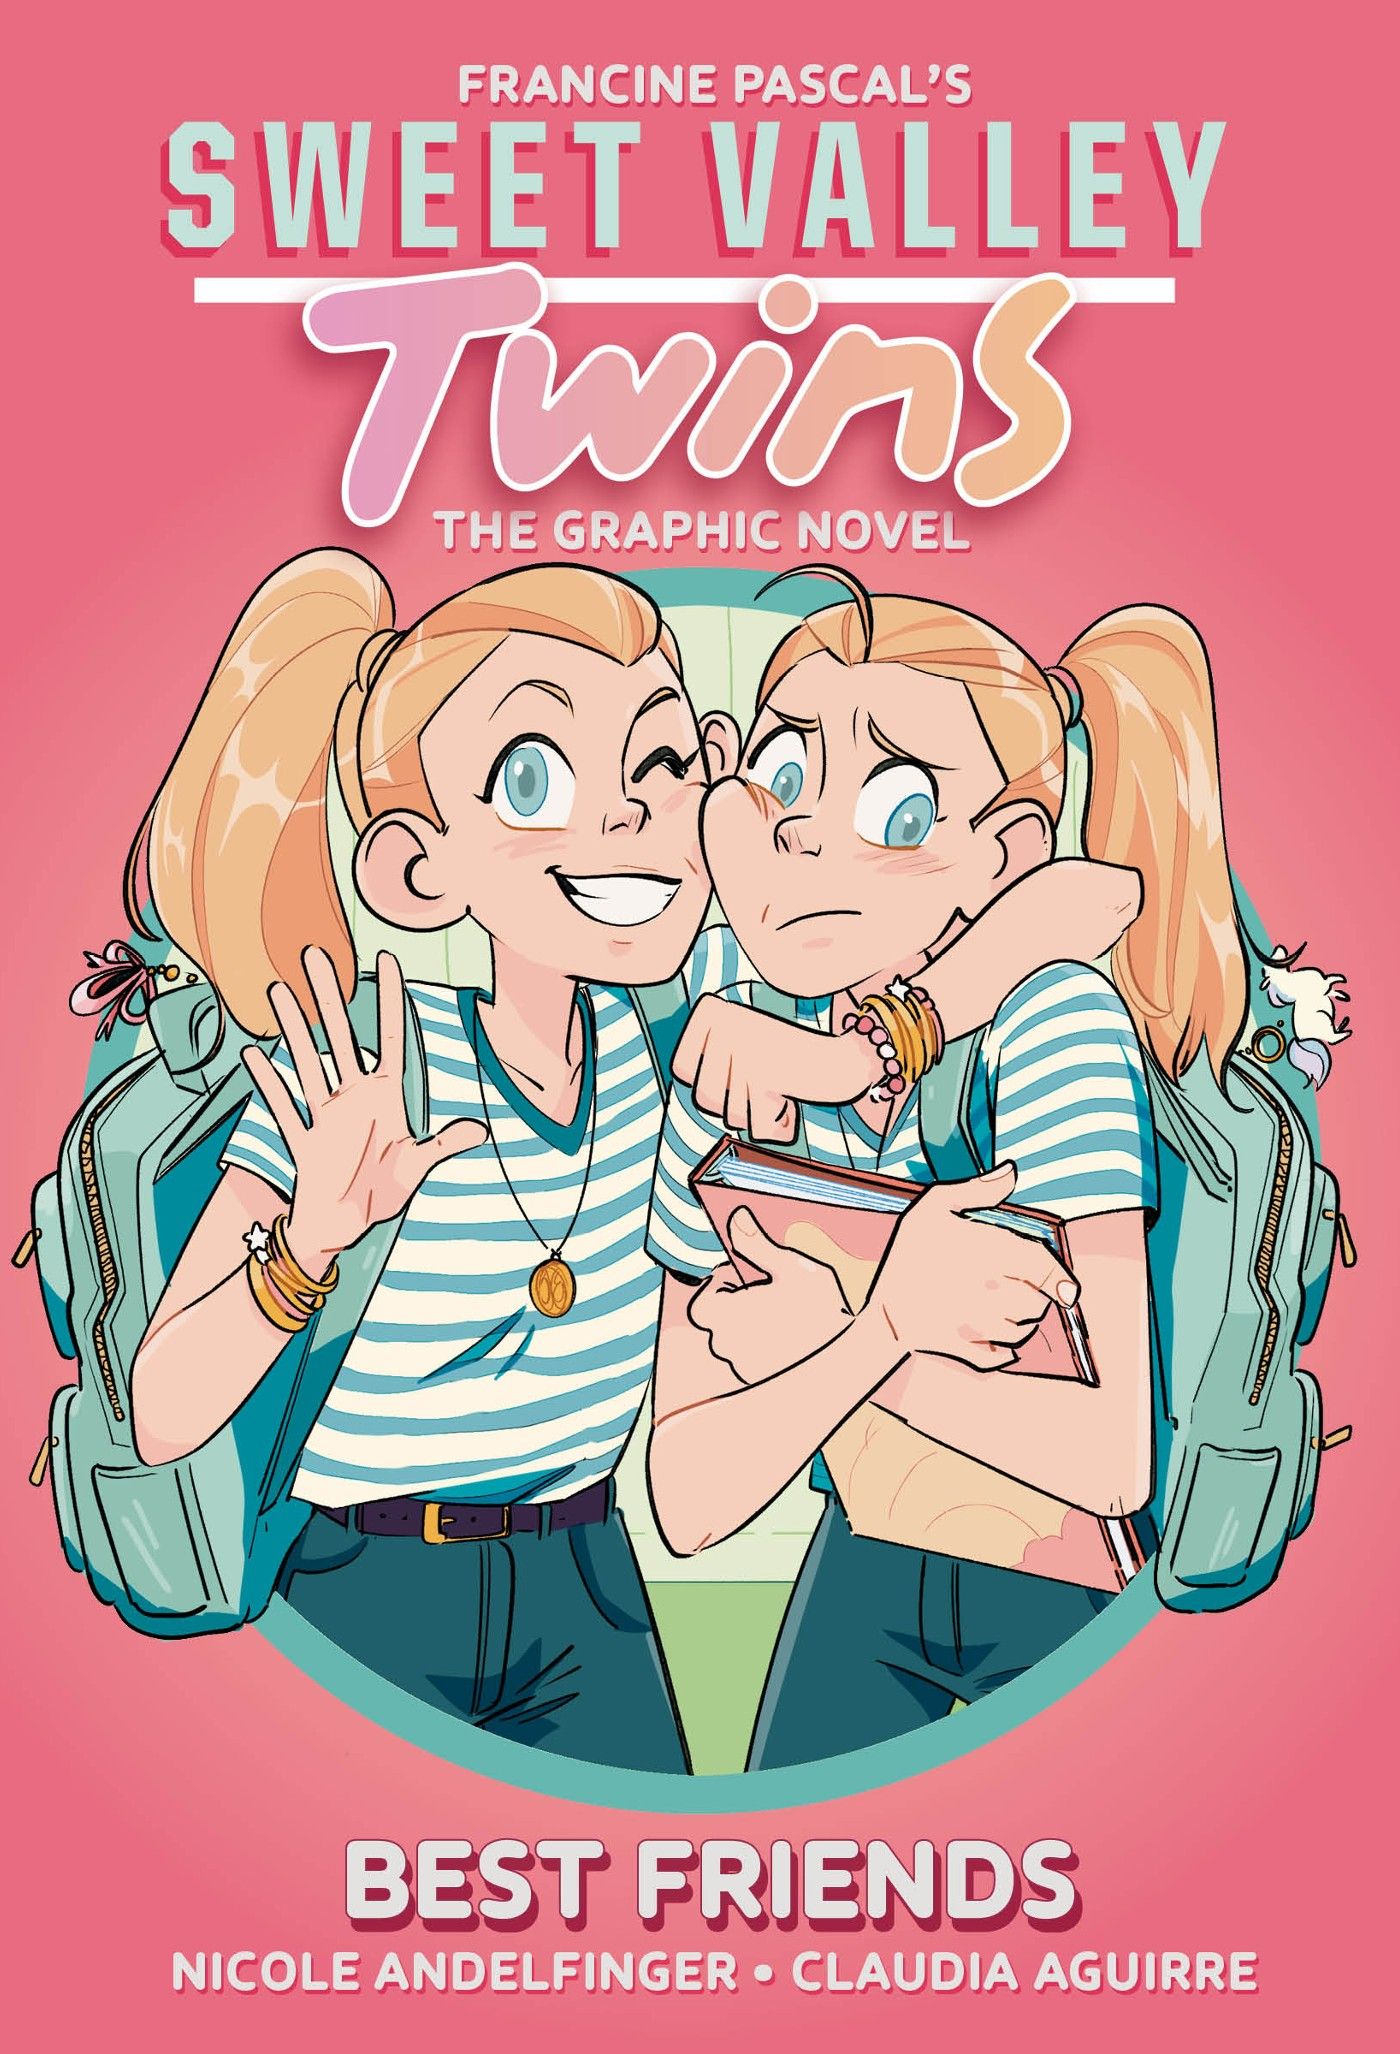 Sweet Valley Twins Graphic Novel by Nicole Andelfinger and Claudia Aguirre